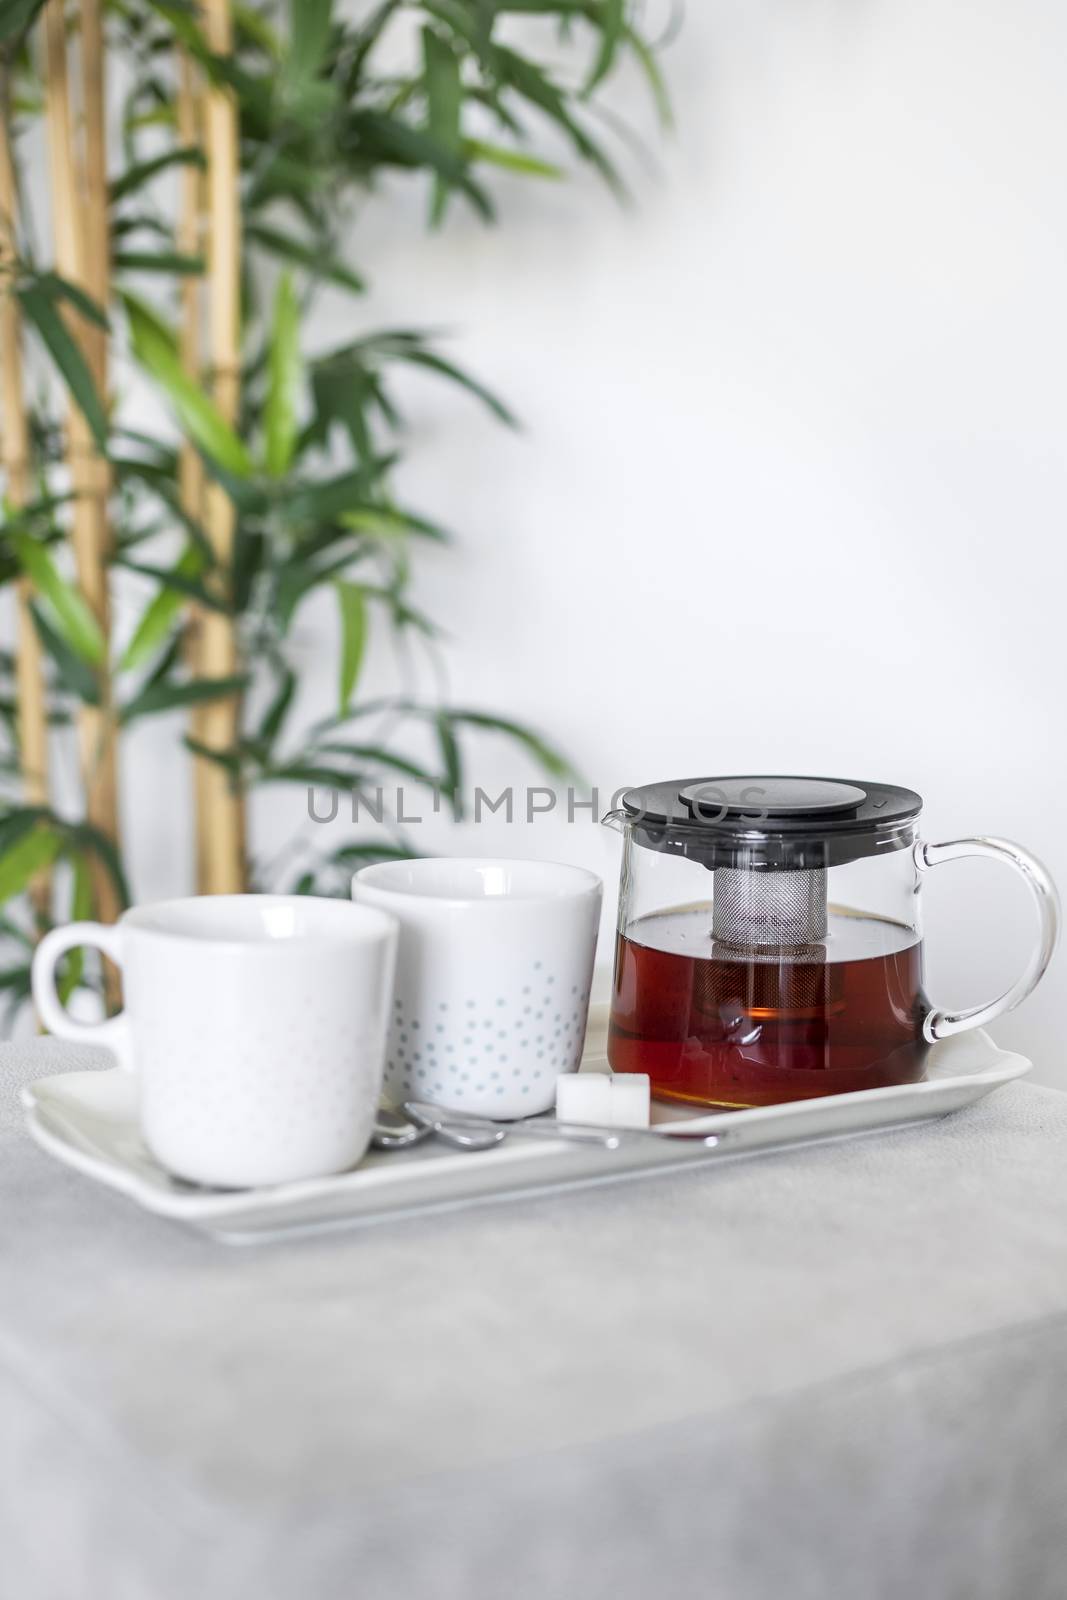 Teapot and cups setup on a tray with bamboo plant in the background, bright light mood.